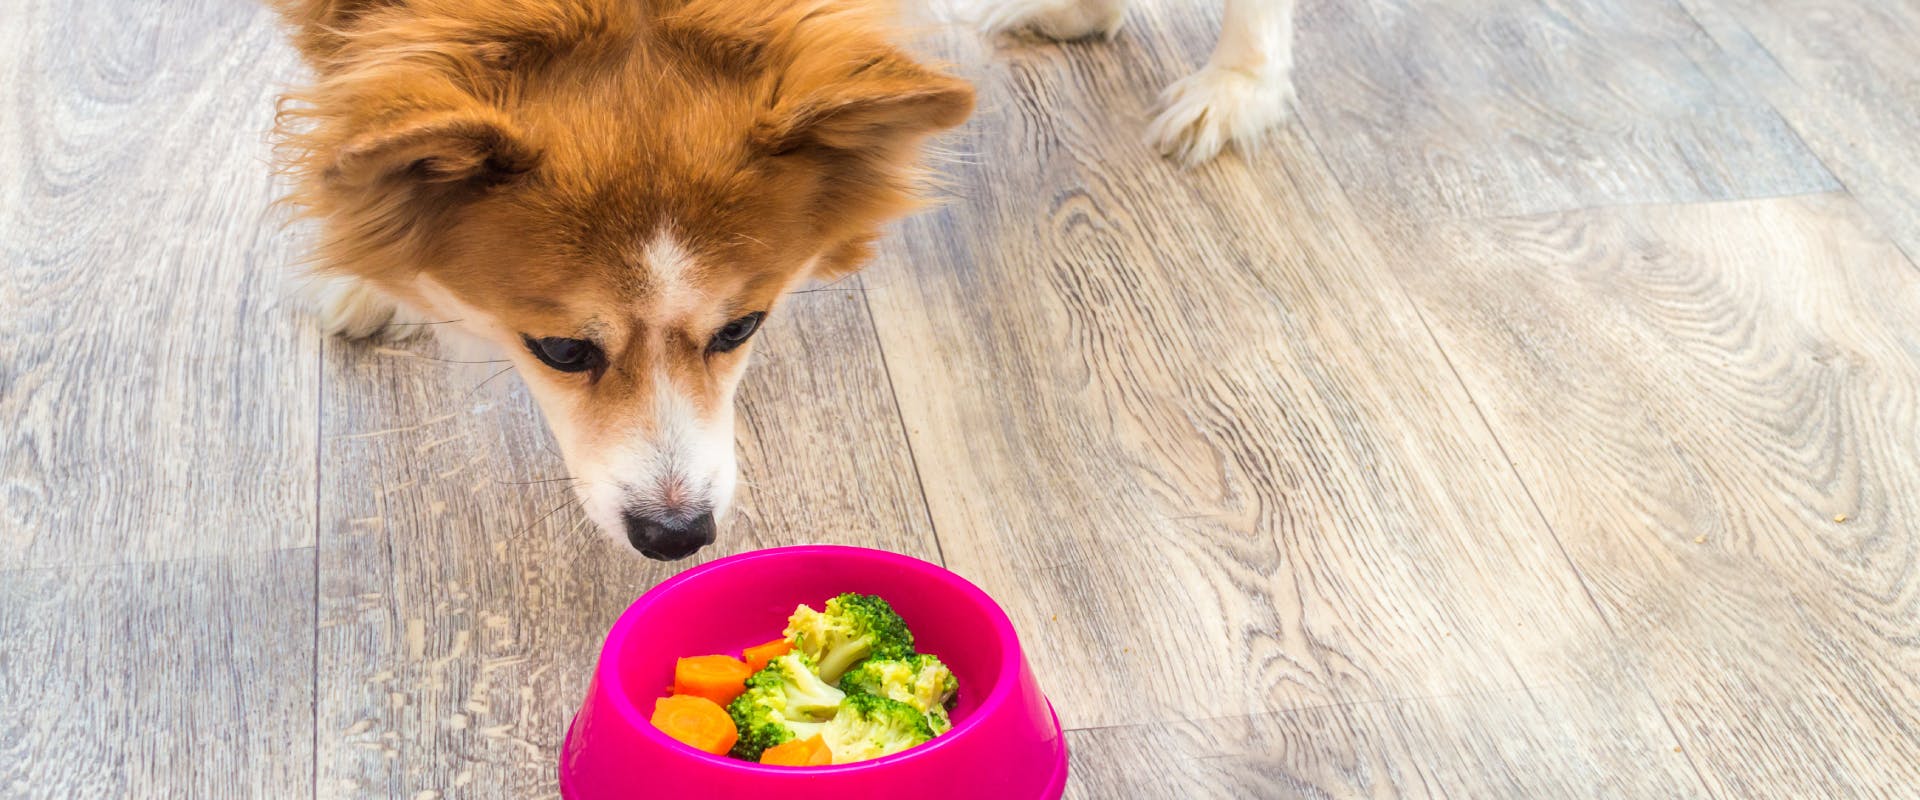 a long haired corgi sniffing a pink dog bowl with carrots and broccoli inside